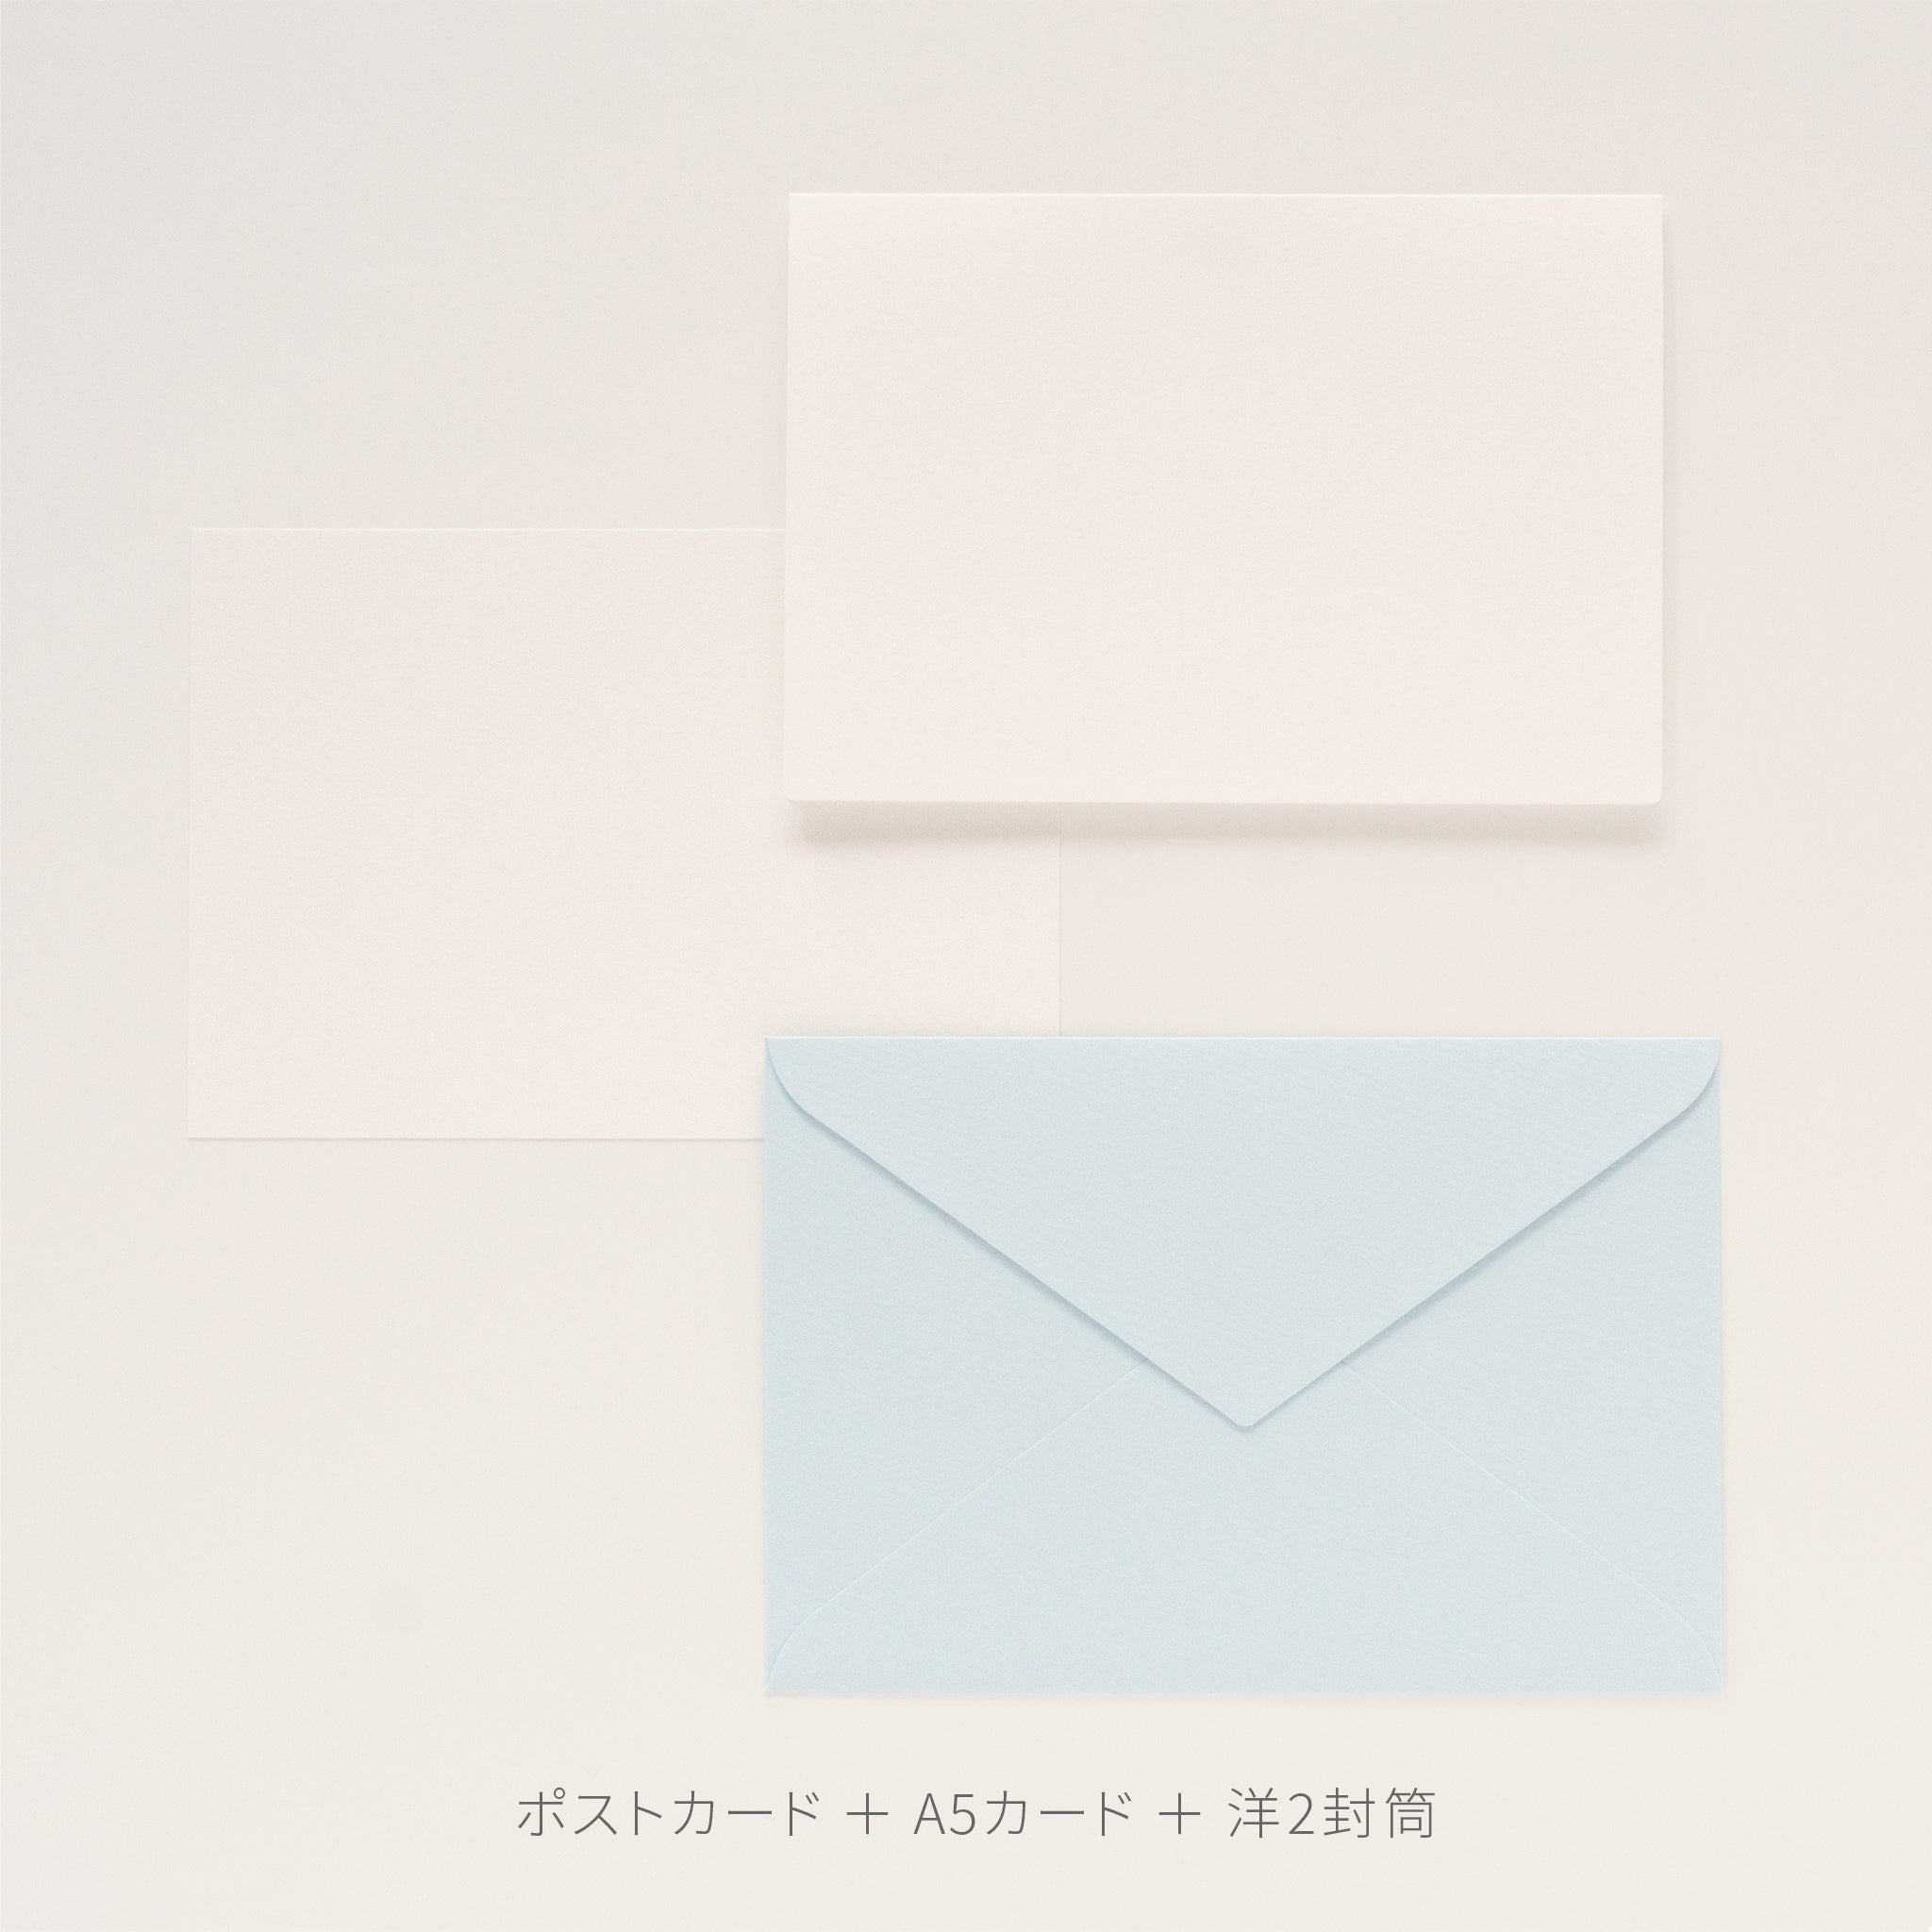 PAPER PALETTE 洋2封筒 マーメイド ターコイズ | products.takeopaper.com